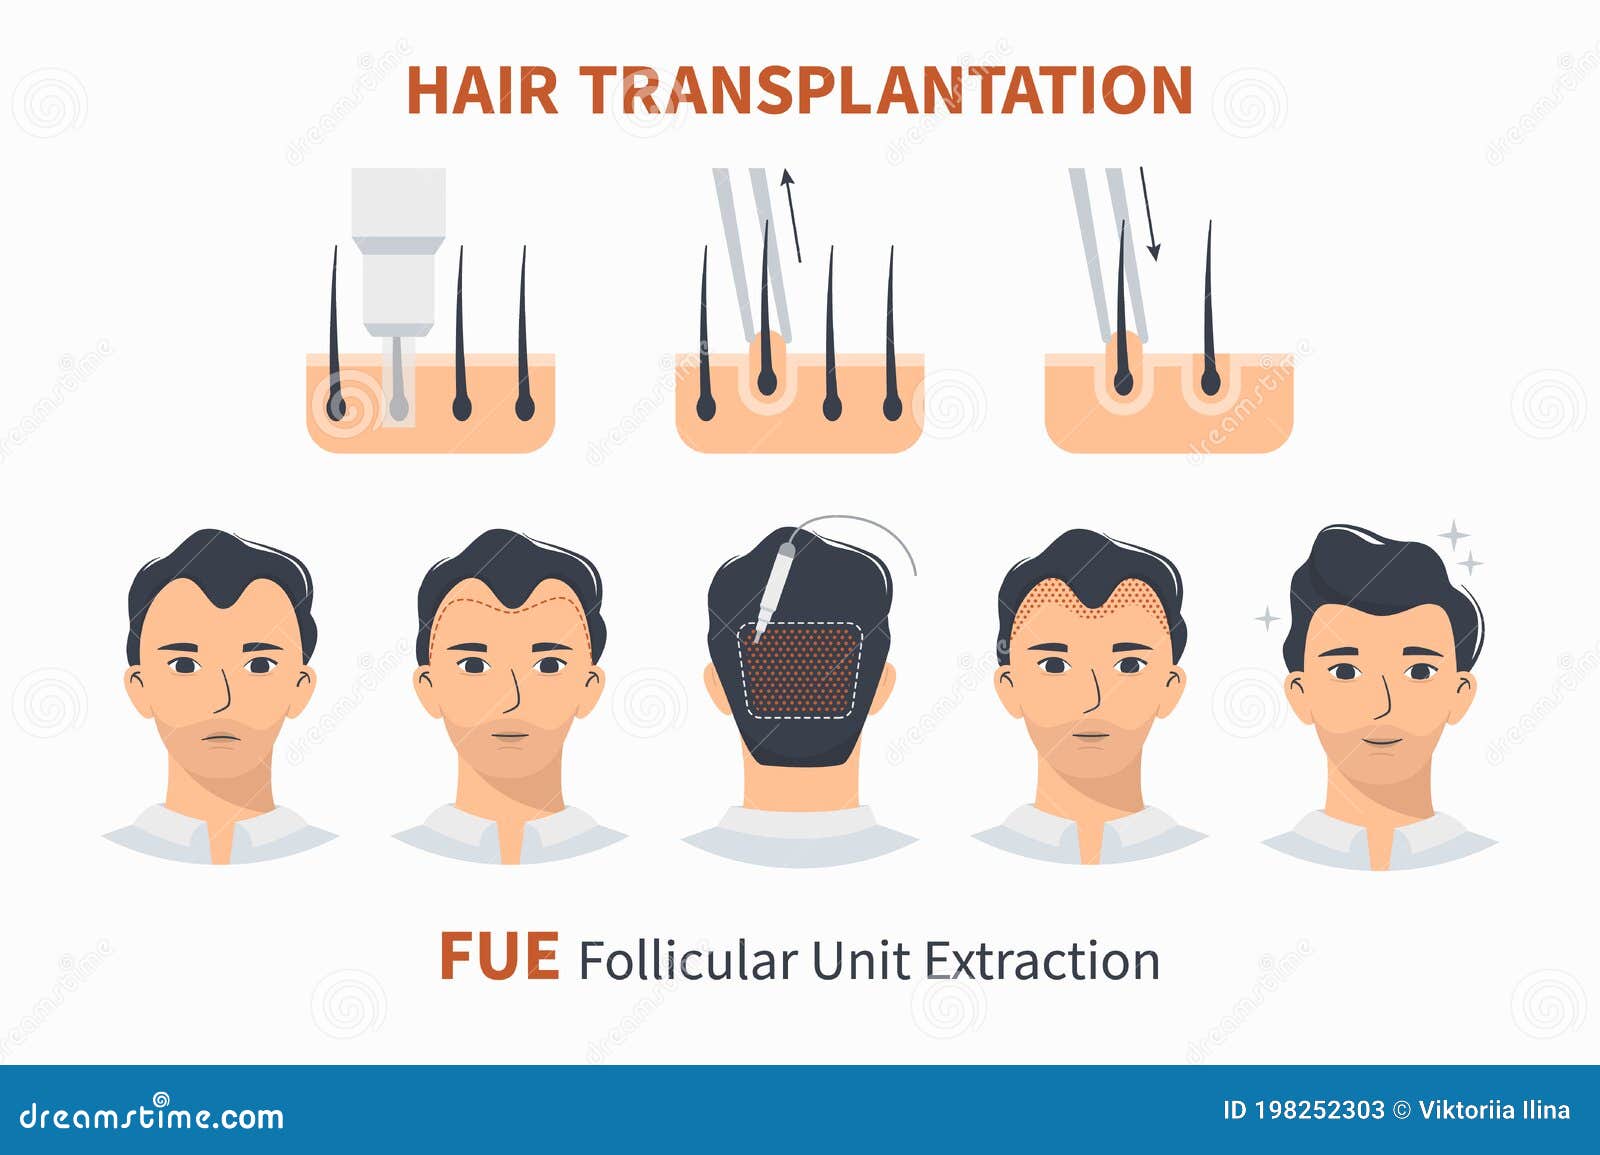 stages of hair transplantation fue unit extraction